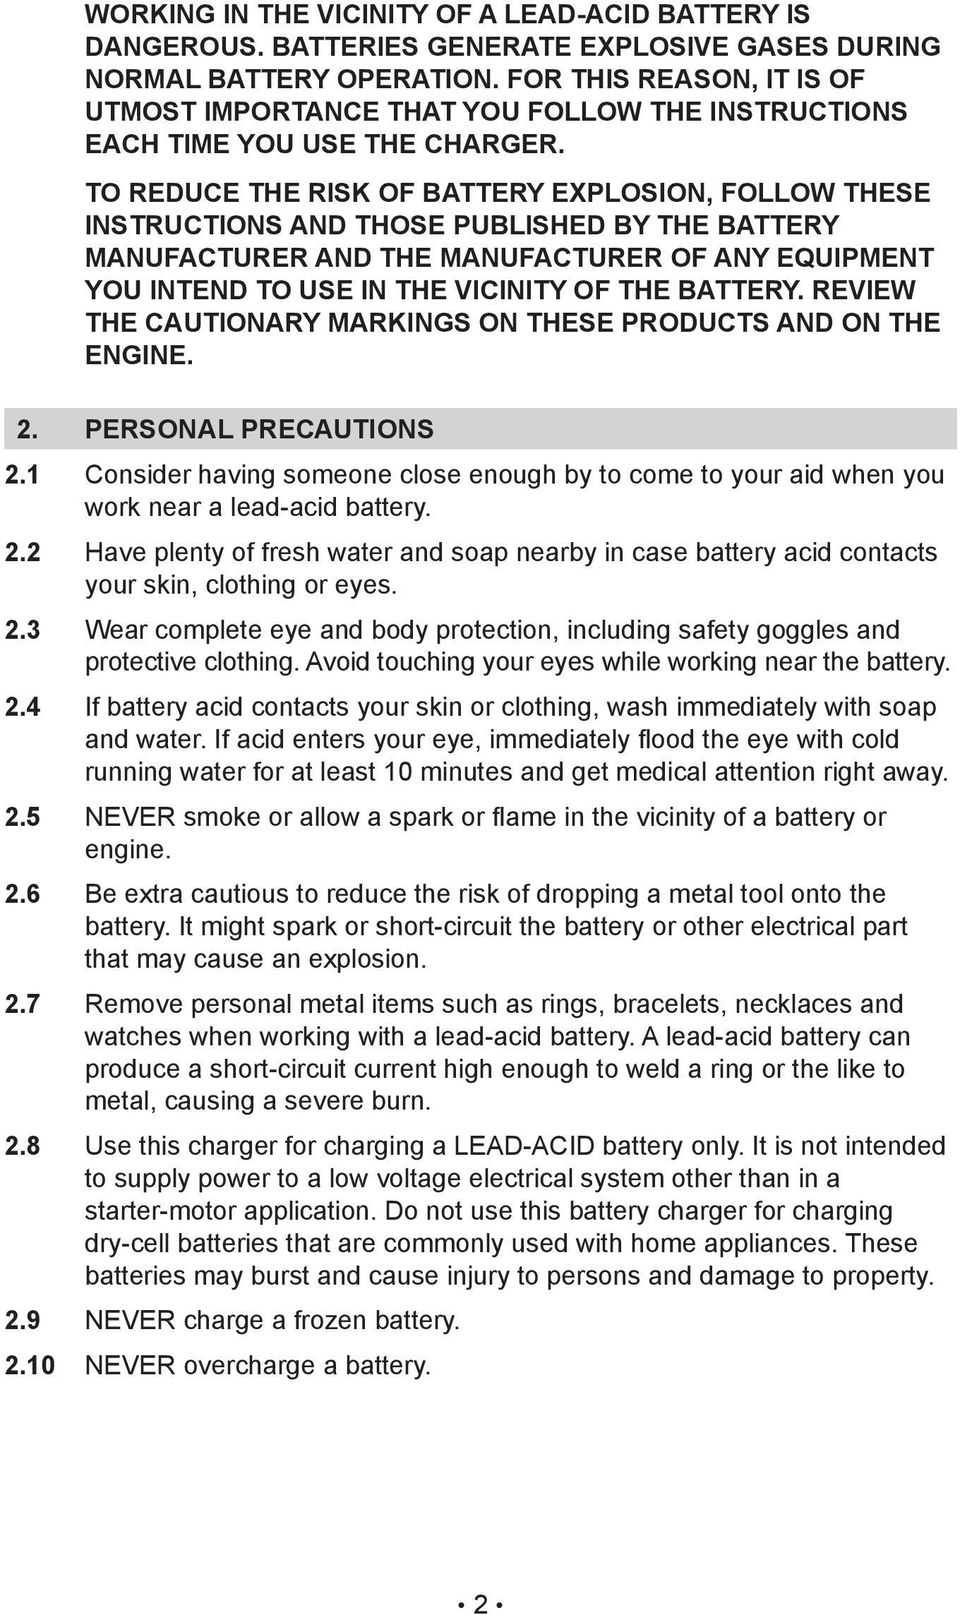 TO REDUCE THE RISK OF BATTERY EXPLOSION, FOLLOW THESE INSTRUCTIONS AND THOSE PUBLISHED BY THE BATTERY MANUFACTURER AND THE MANUFACTURER OF ANY EQUIPMENT YOU INTEND TO USE IN THE VICINITY OF THE